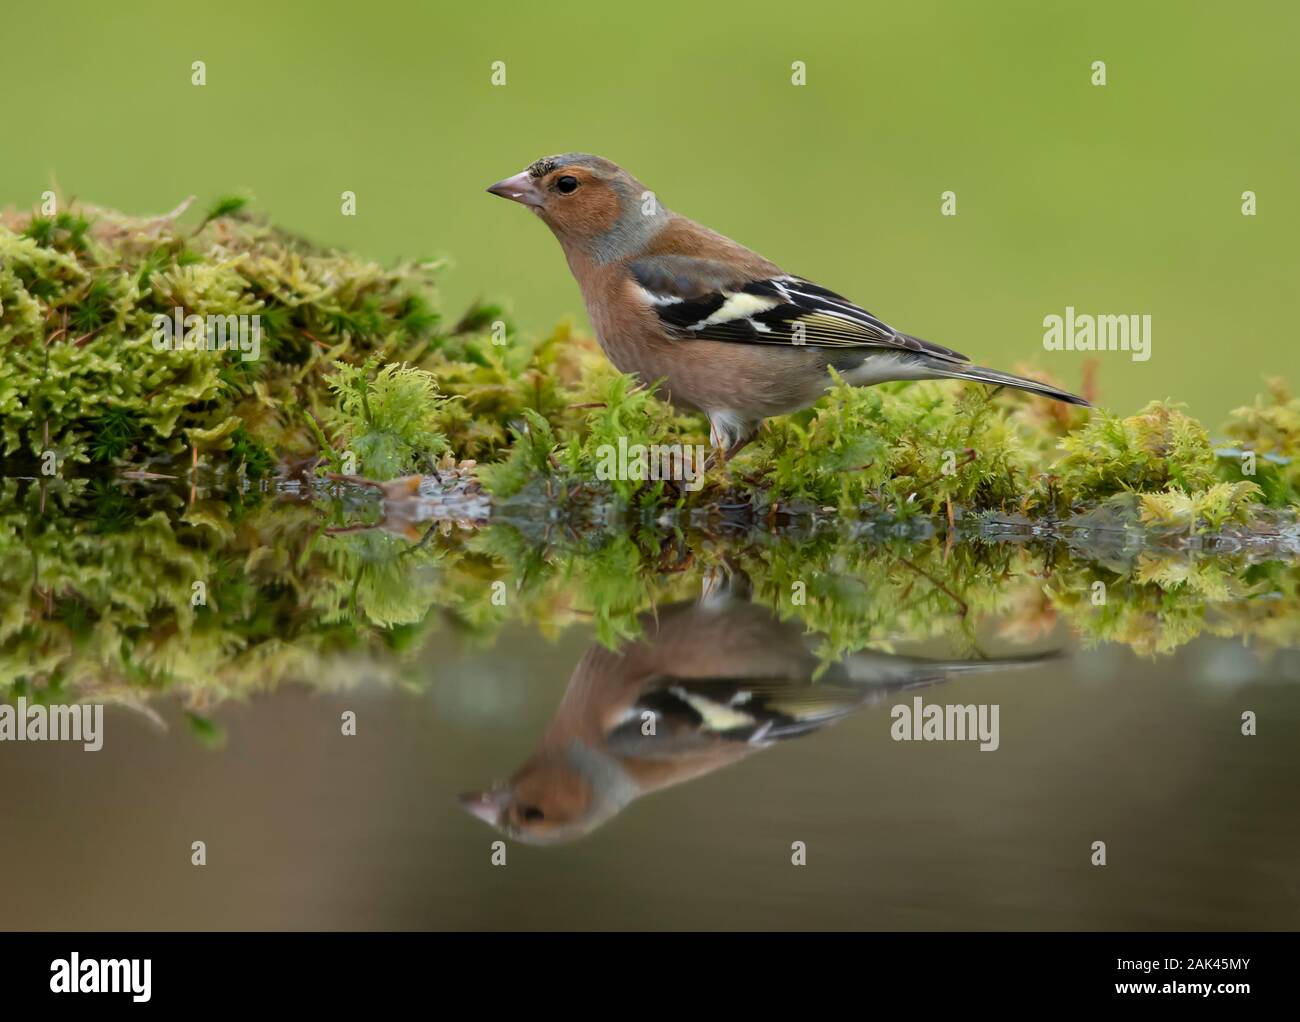 Chaffinch (Fringilla celebs). Male Chaffinch perched at the edge of a garden pond with reflection in the water. Stock Photo